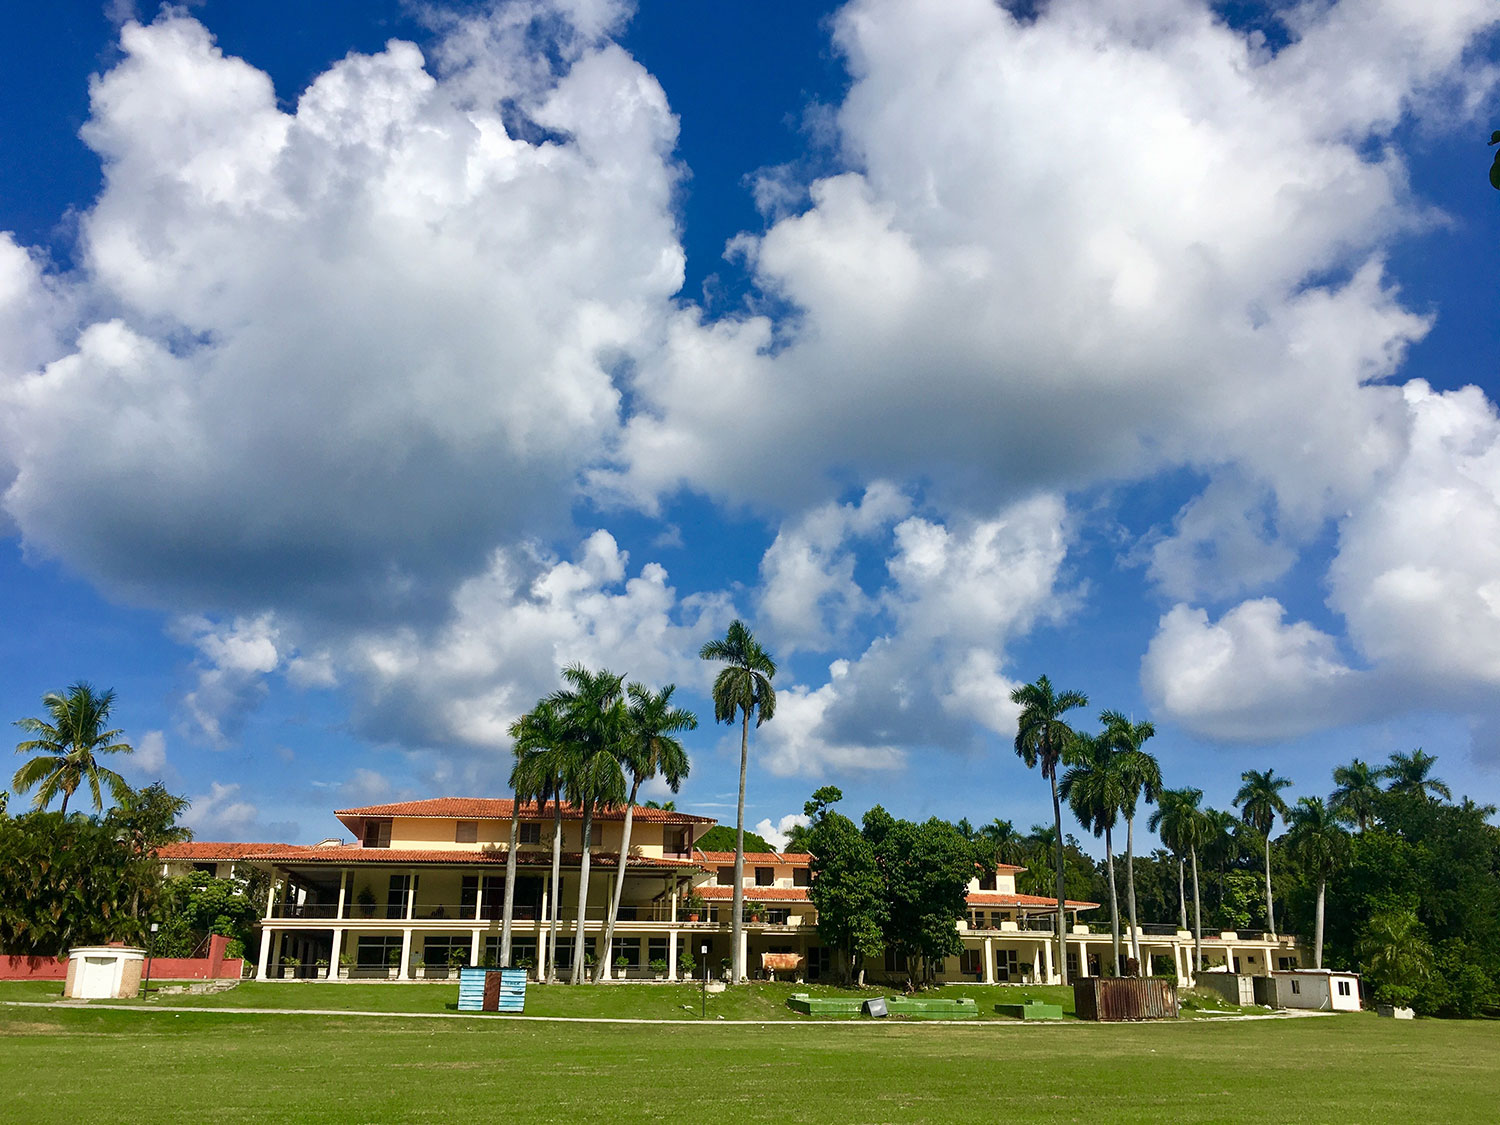 Universidad from back lawn